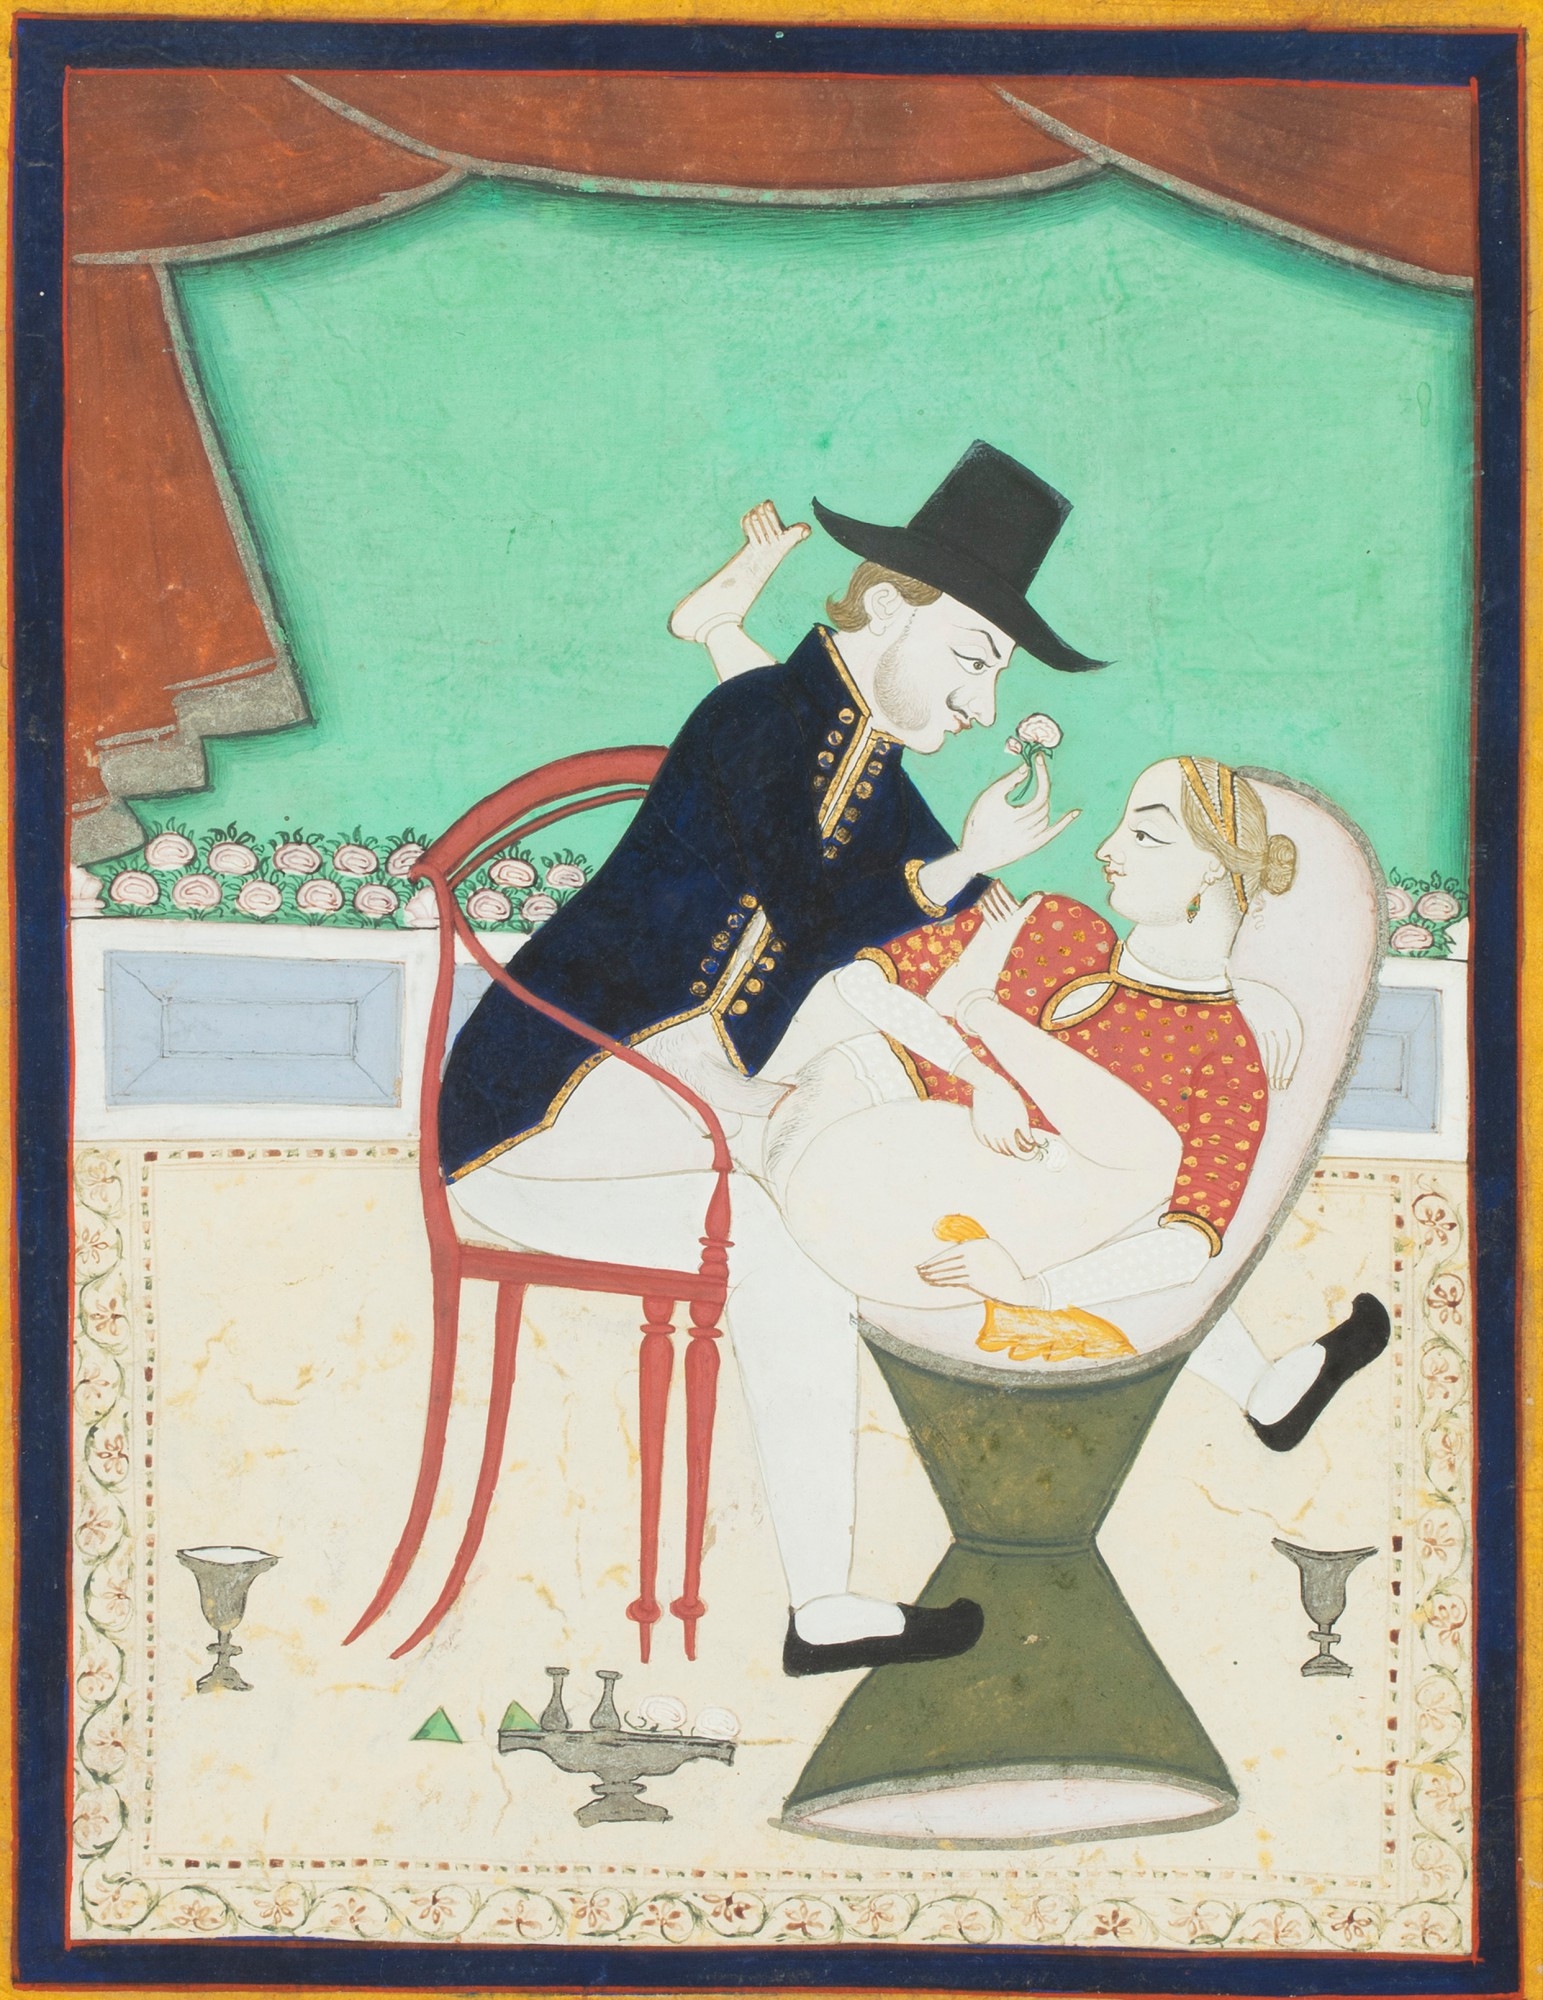 An Indian miniature depicting European s in an erotic scene, gouache and gold on paper, India, Rajasthan, Kotah, mid-19th century by Rajasthan School, 19th Century, mid-19th century